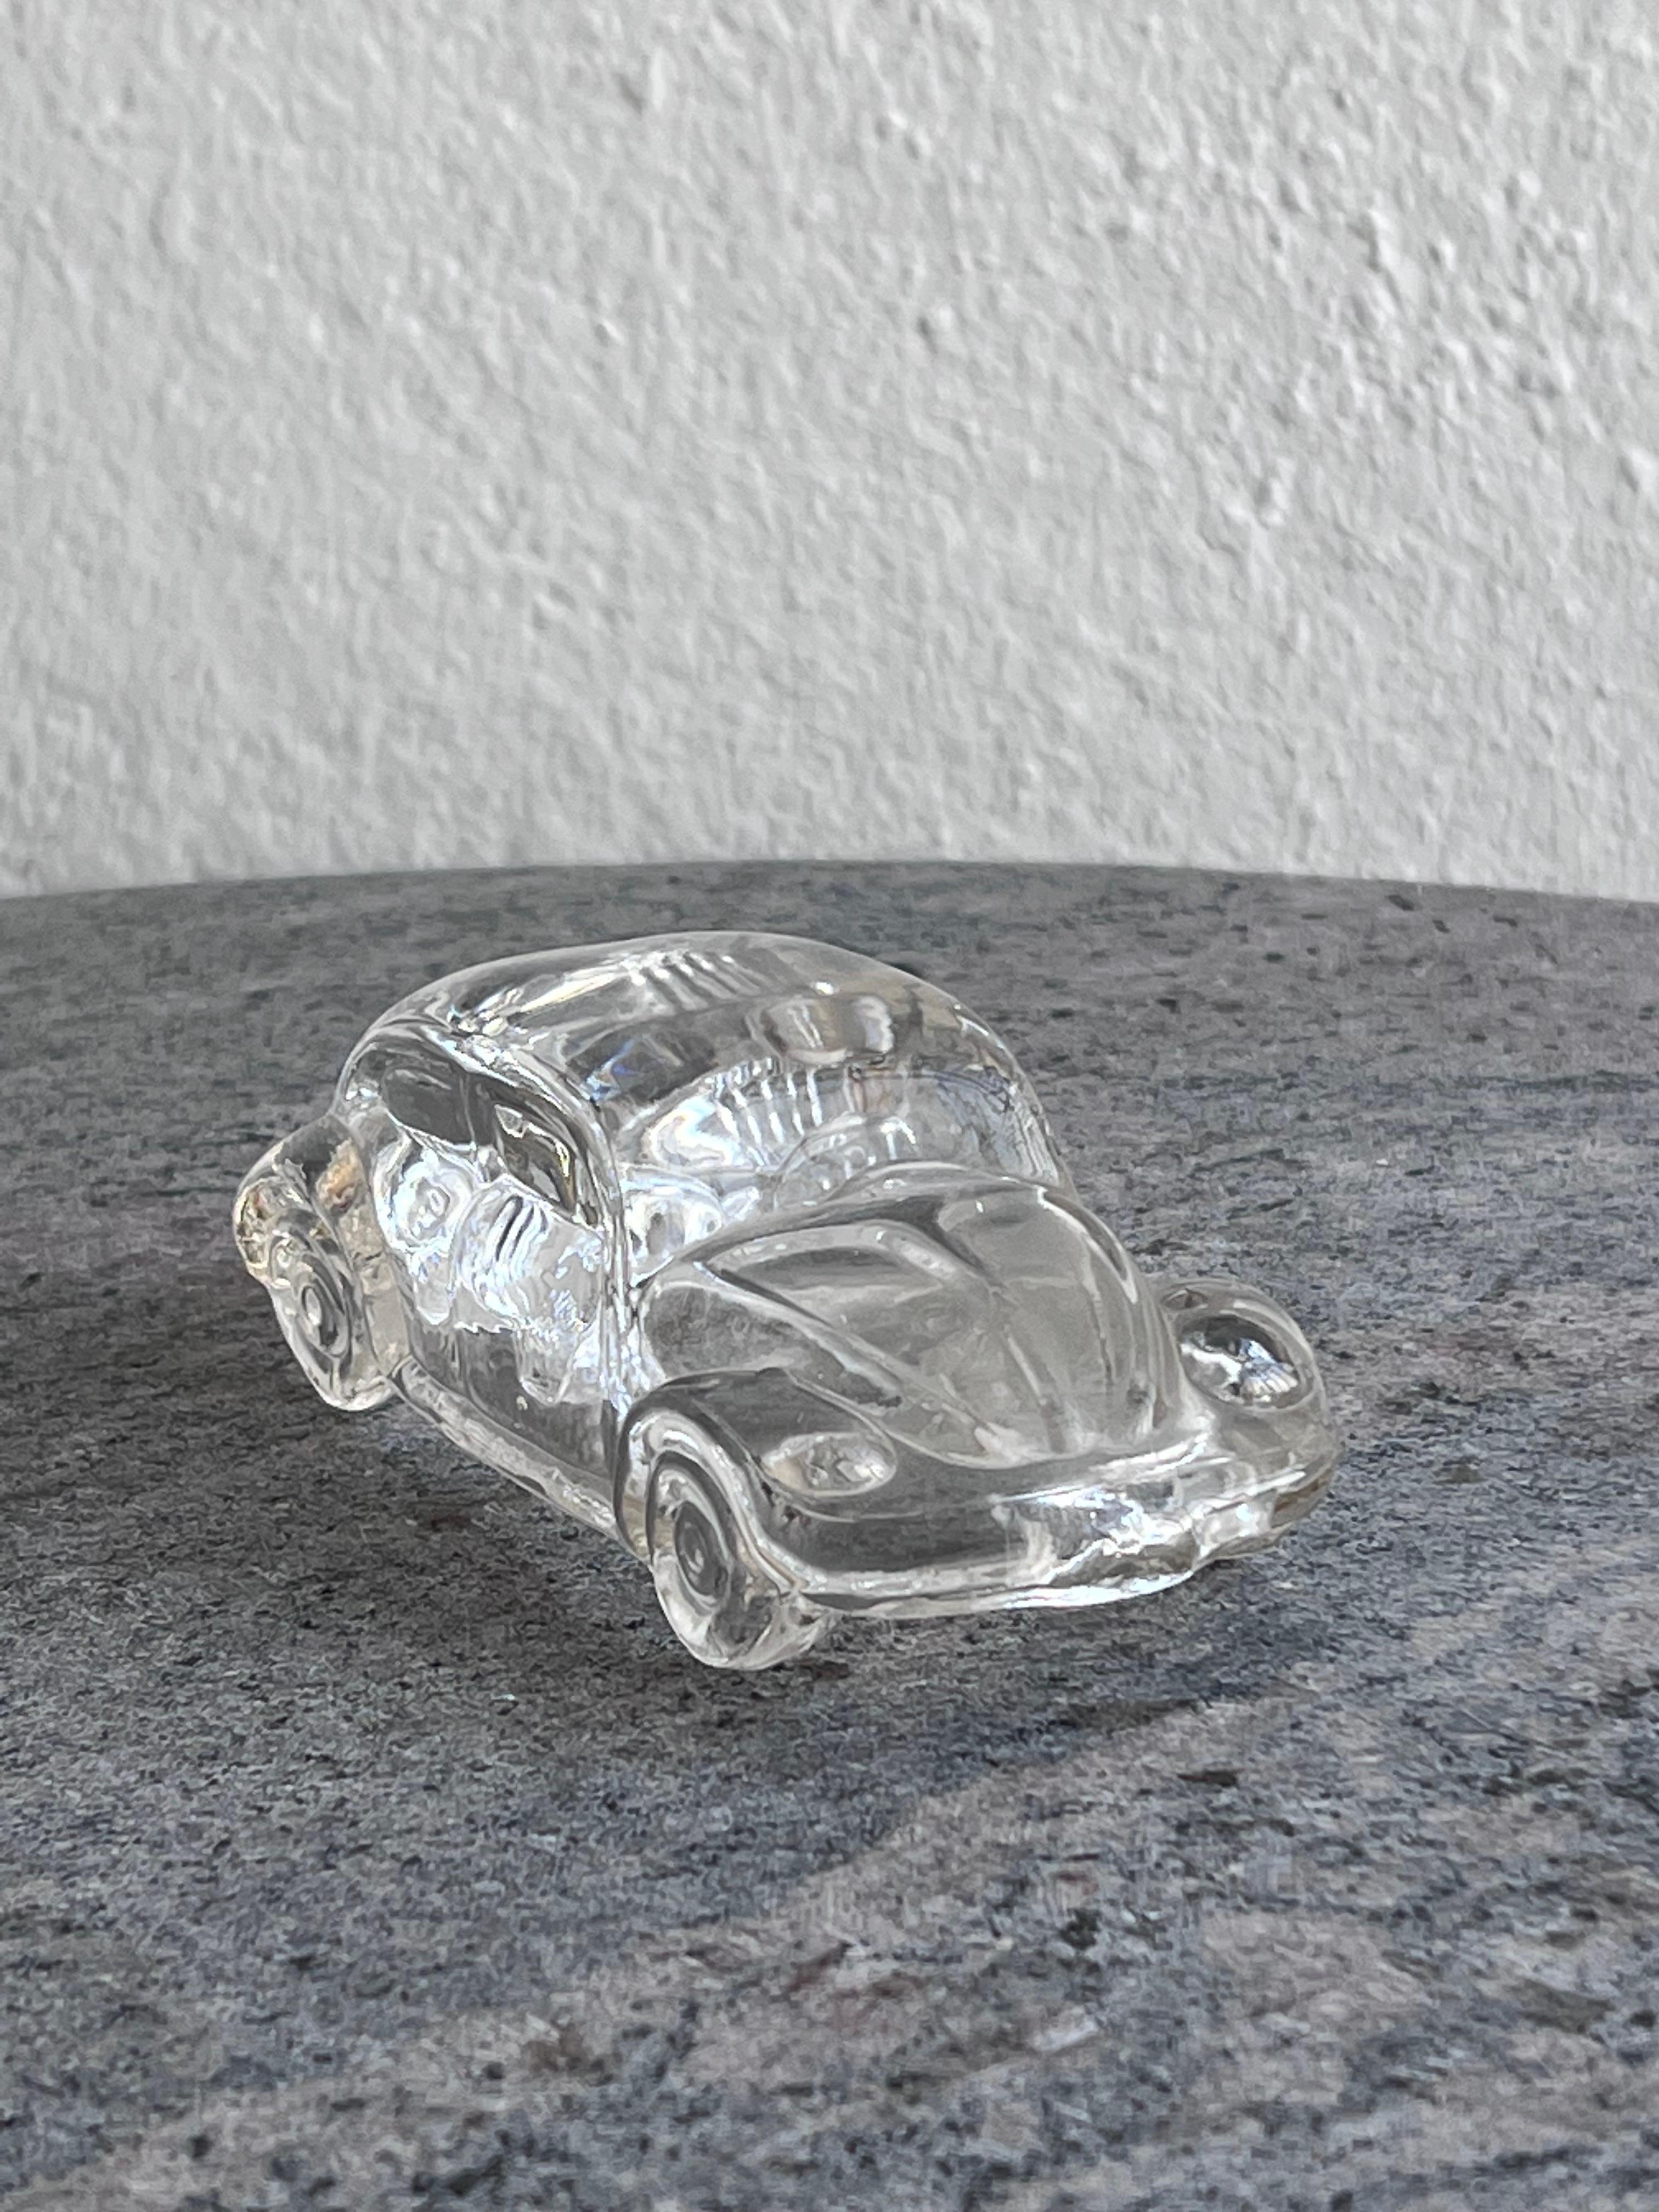 Little but realistic miniature model of a classic Volkswagen Beetle - most likely a version from the late 1970s/early 1980s. It is made in pressed clear glass, and is rich in details, to the point it even shows the iconic ribbed bonnet. The